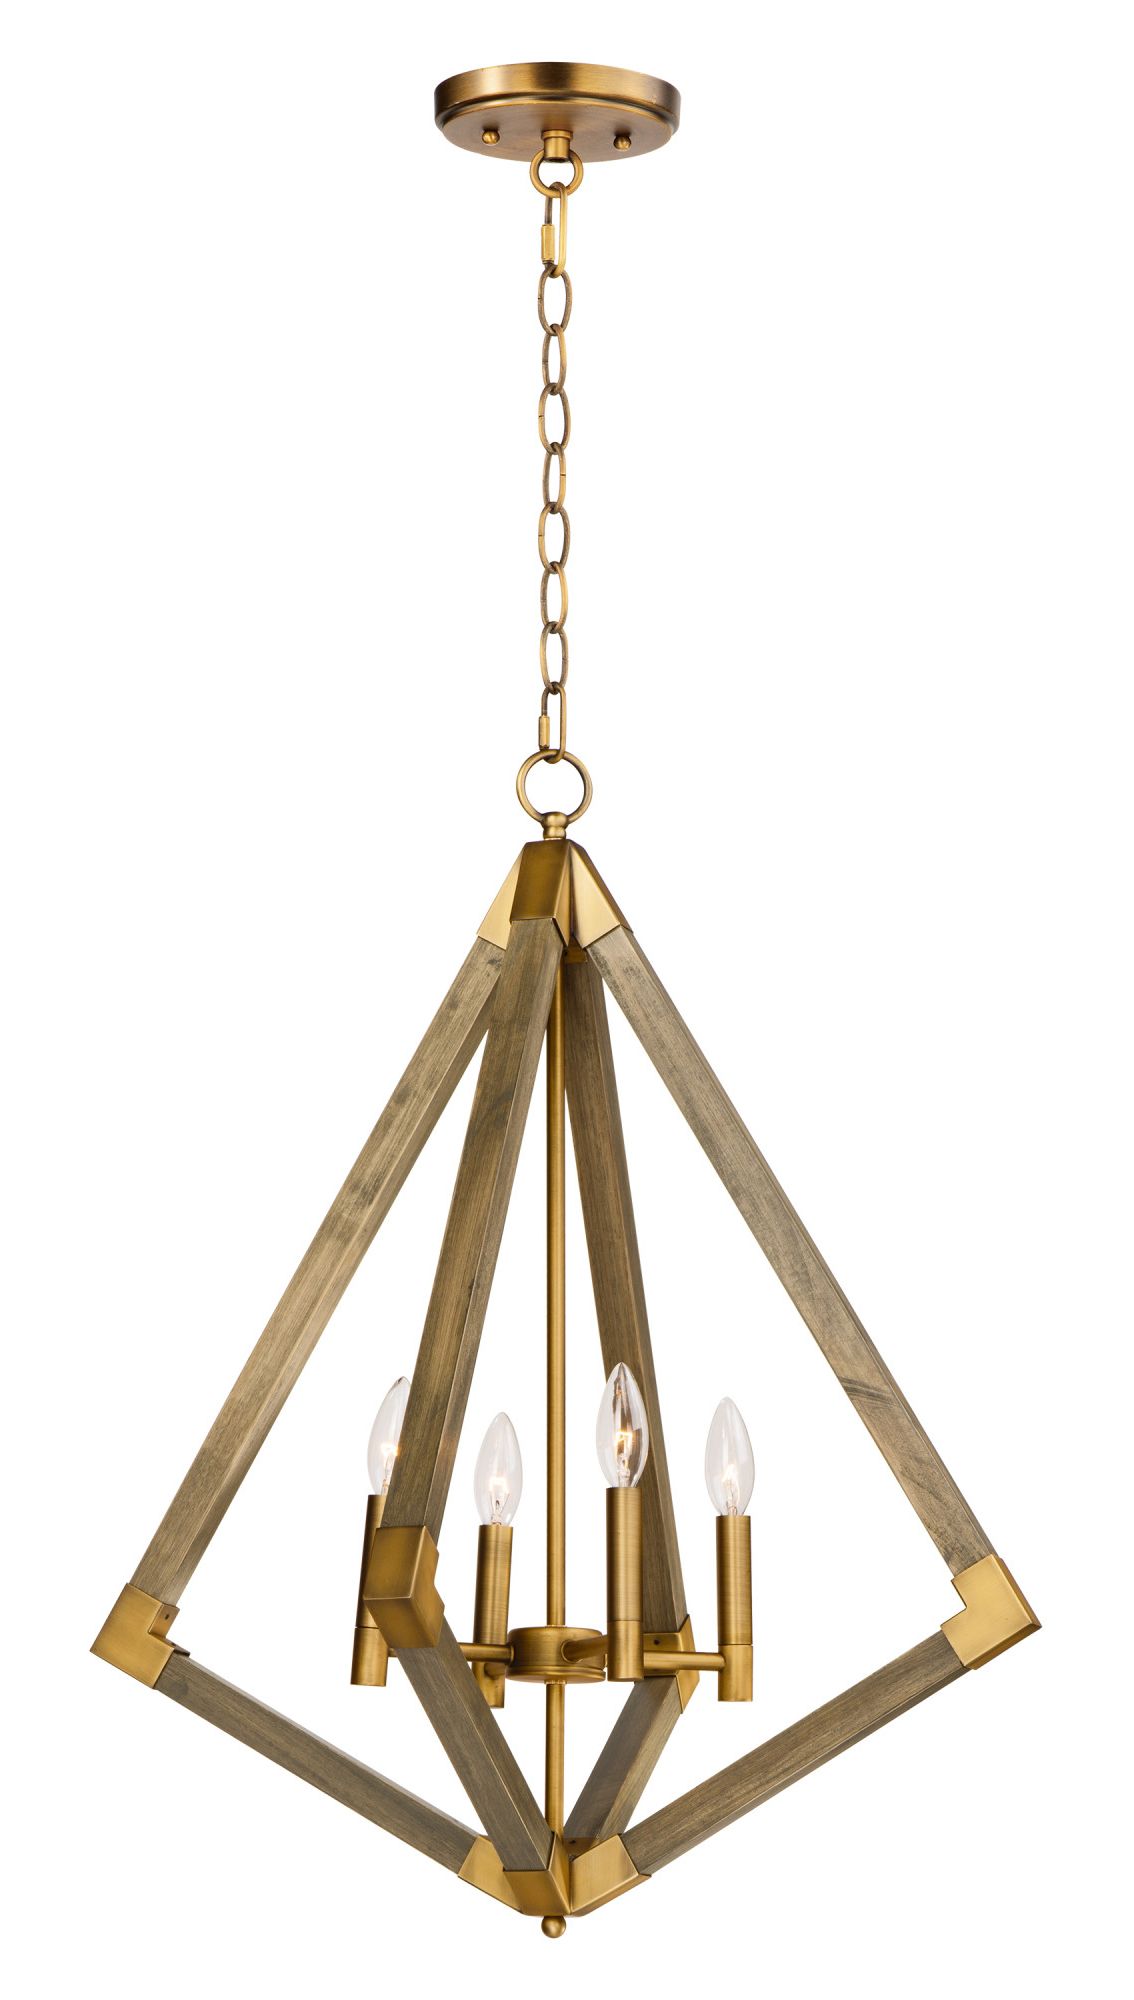 Maxim 12254 Vector 4 Light 24"w Prism Shaped Wood With Regard To Most Recent Weathered Oak Kitchen Island Light Chandeliers (View 9 of 20)